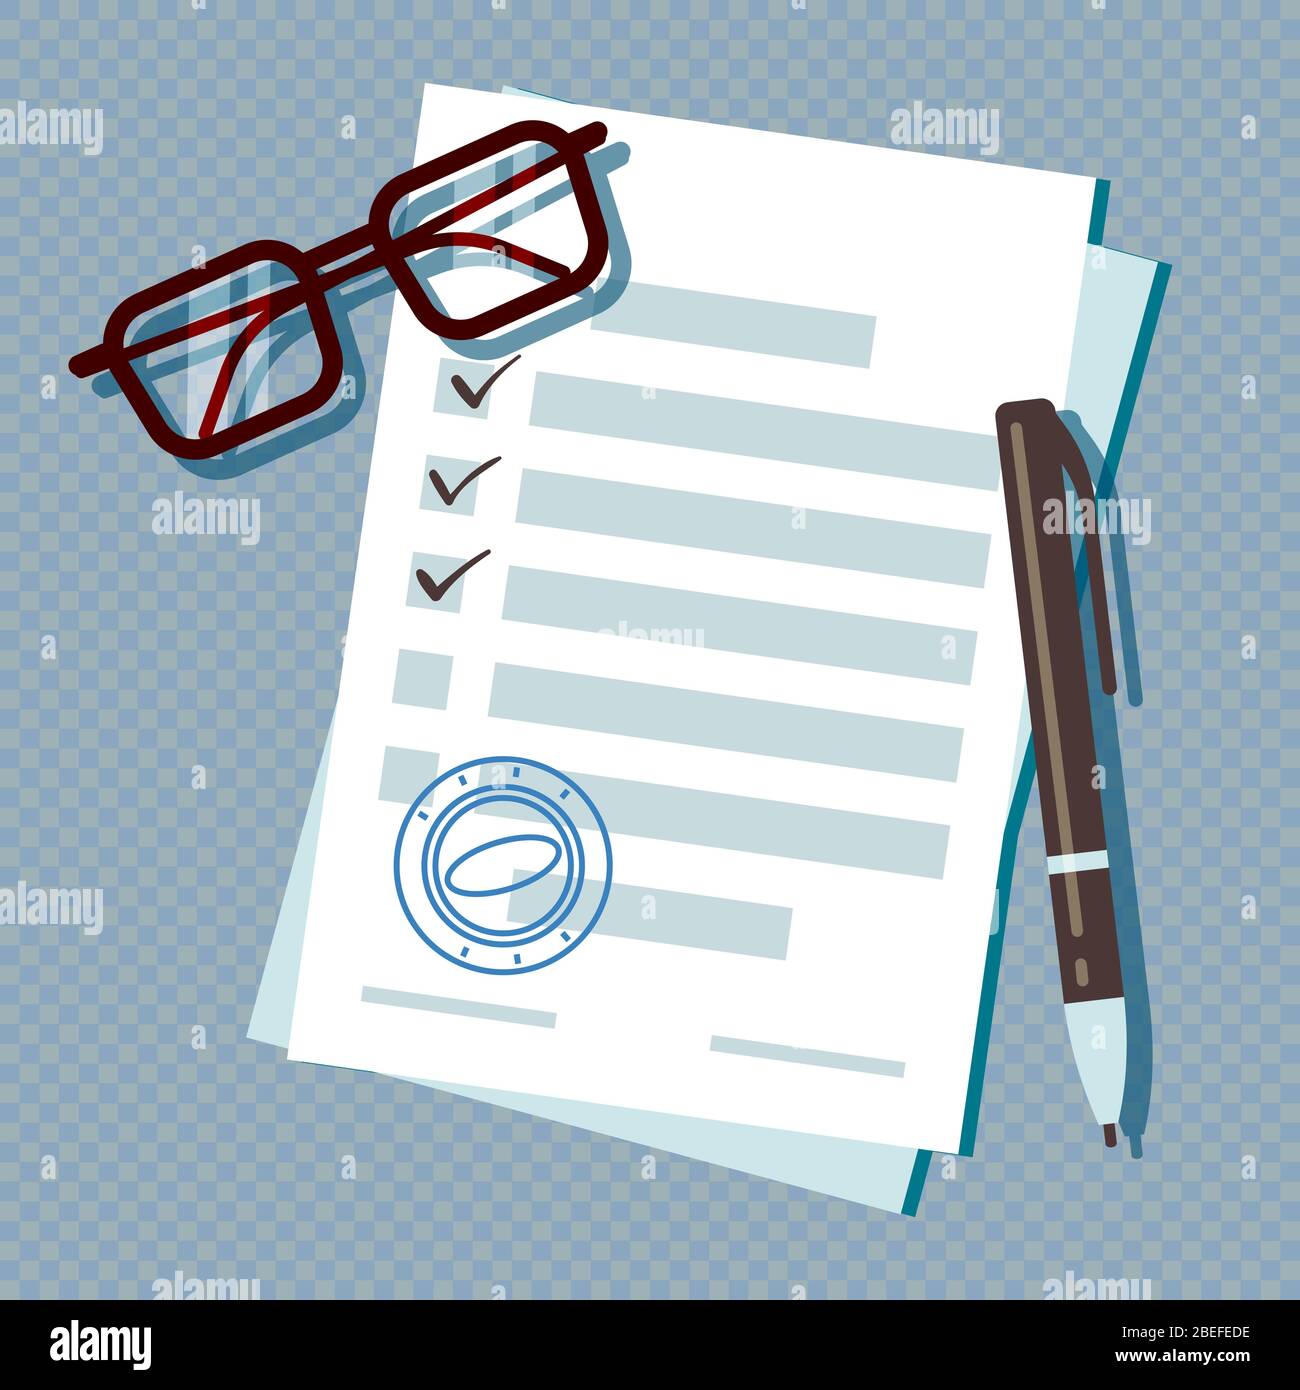 Loan application form document isolated on transparent background. Loan document form for mortgage, paperwork illustration business vector Stock Vector